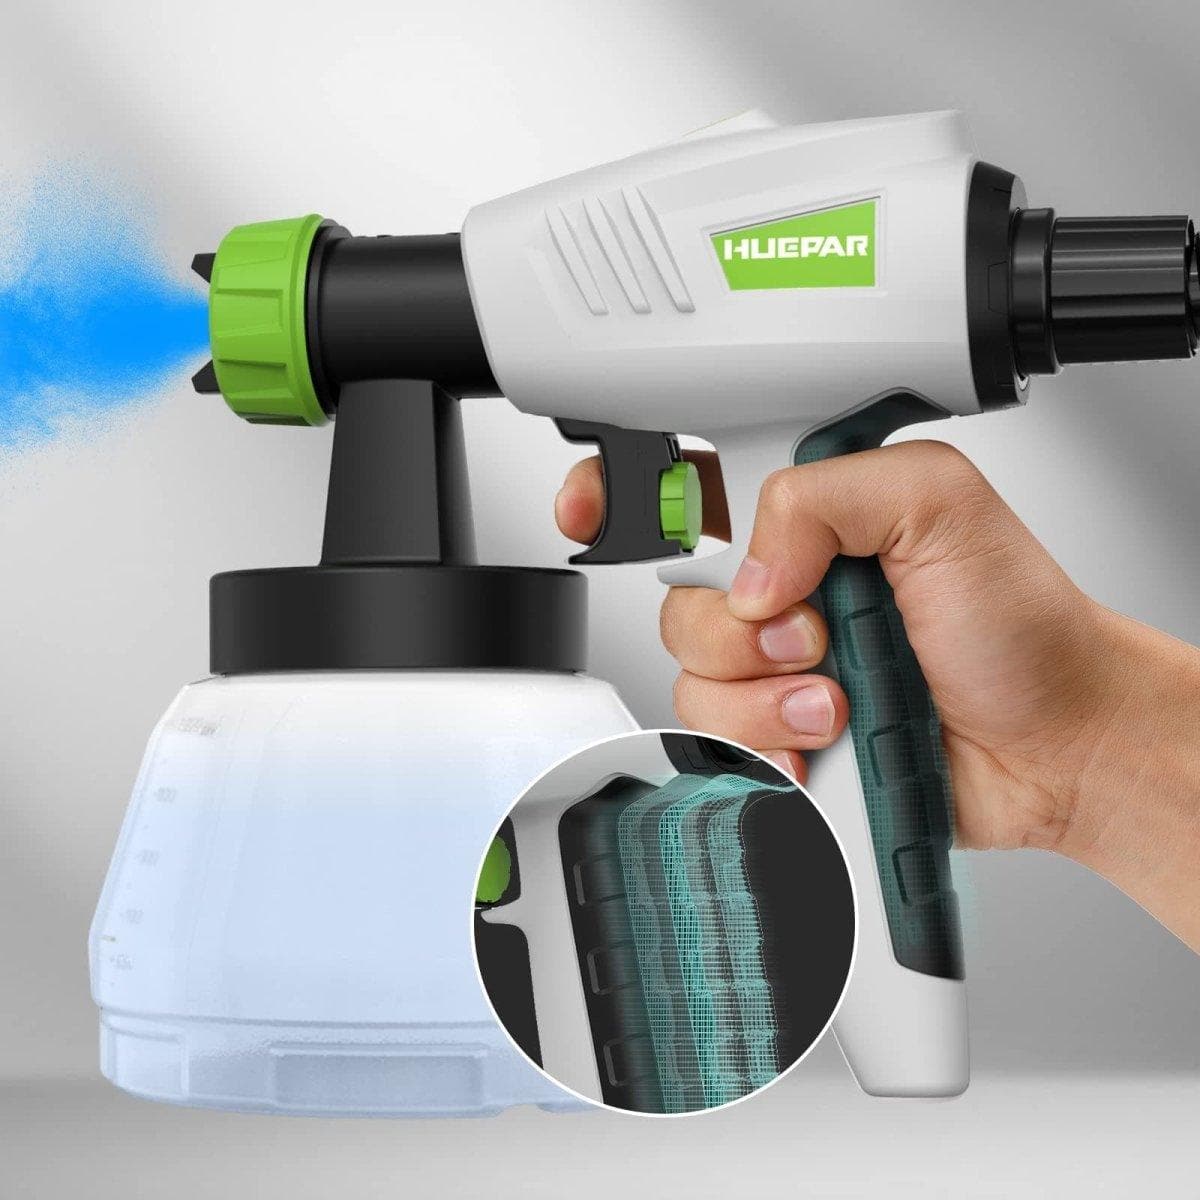 Huepar Tools SG800 HVLP electric paint sprayer with 4 metal nozzles and 3 patterns, ideal for home interior and exterior walls, house painting, ceiling, fence, cabinet, chair9